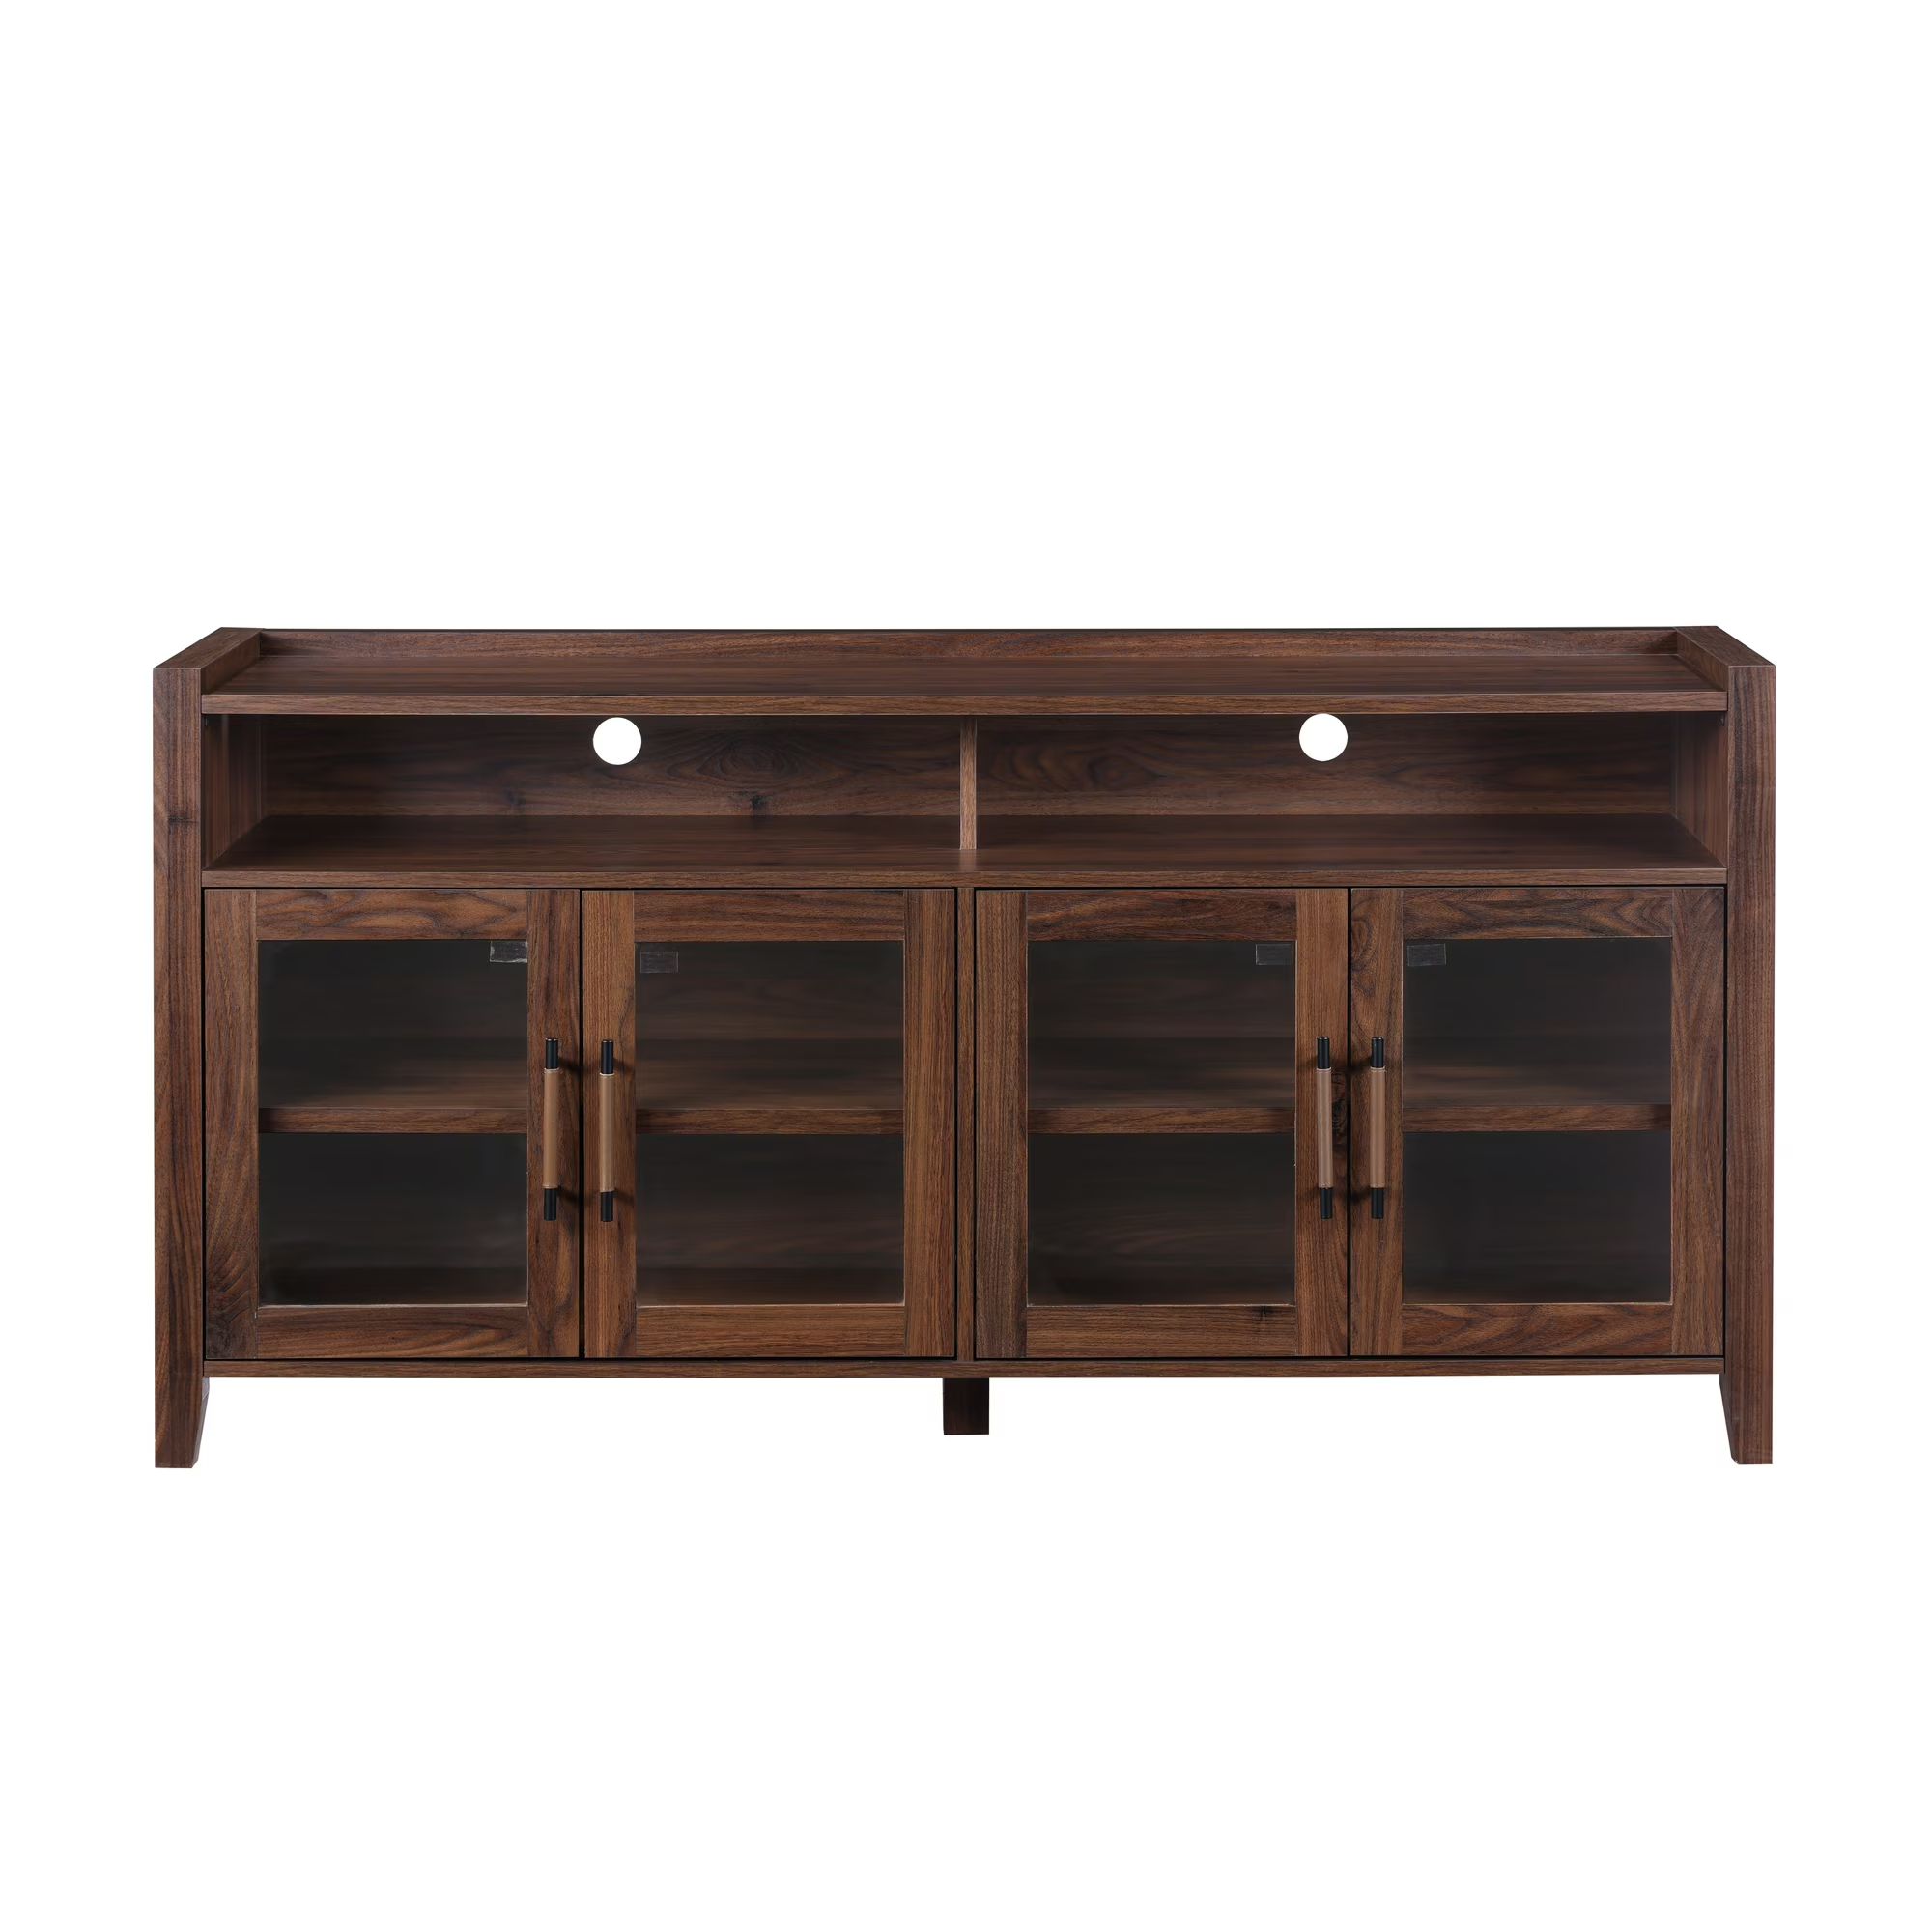 Better Homes & Gardens Reading Refined Farmhouse TV Stand for TVs up to 65", Walnut Finish | Walmart (US)